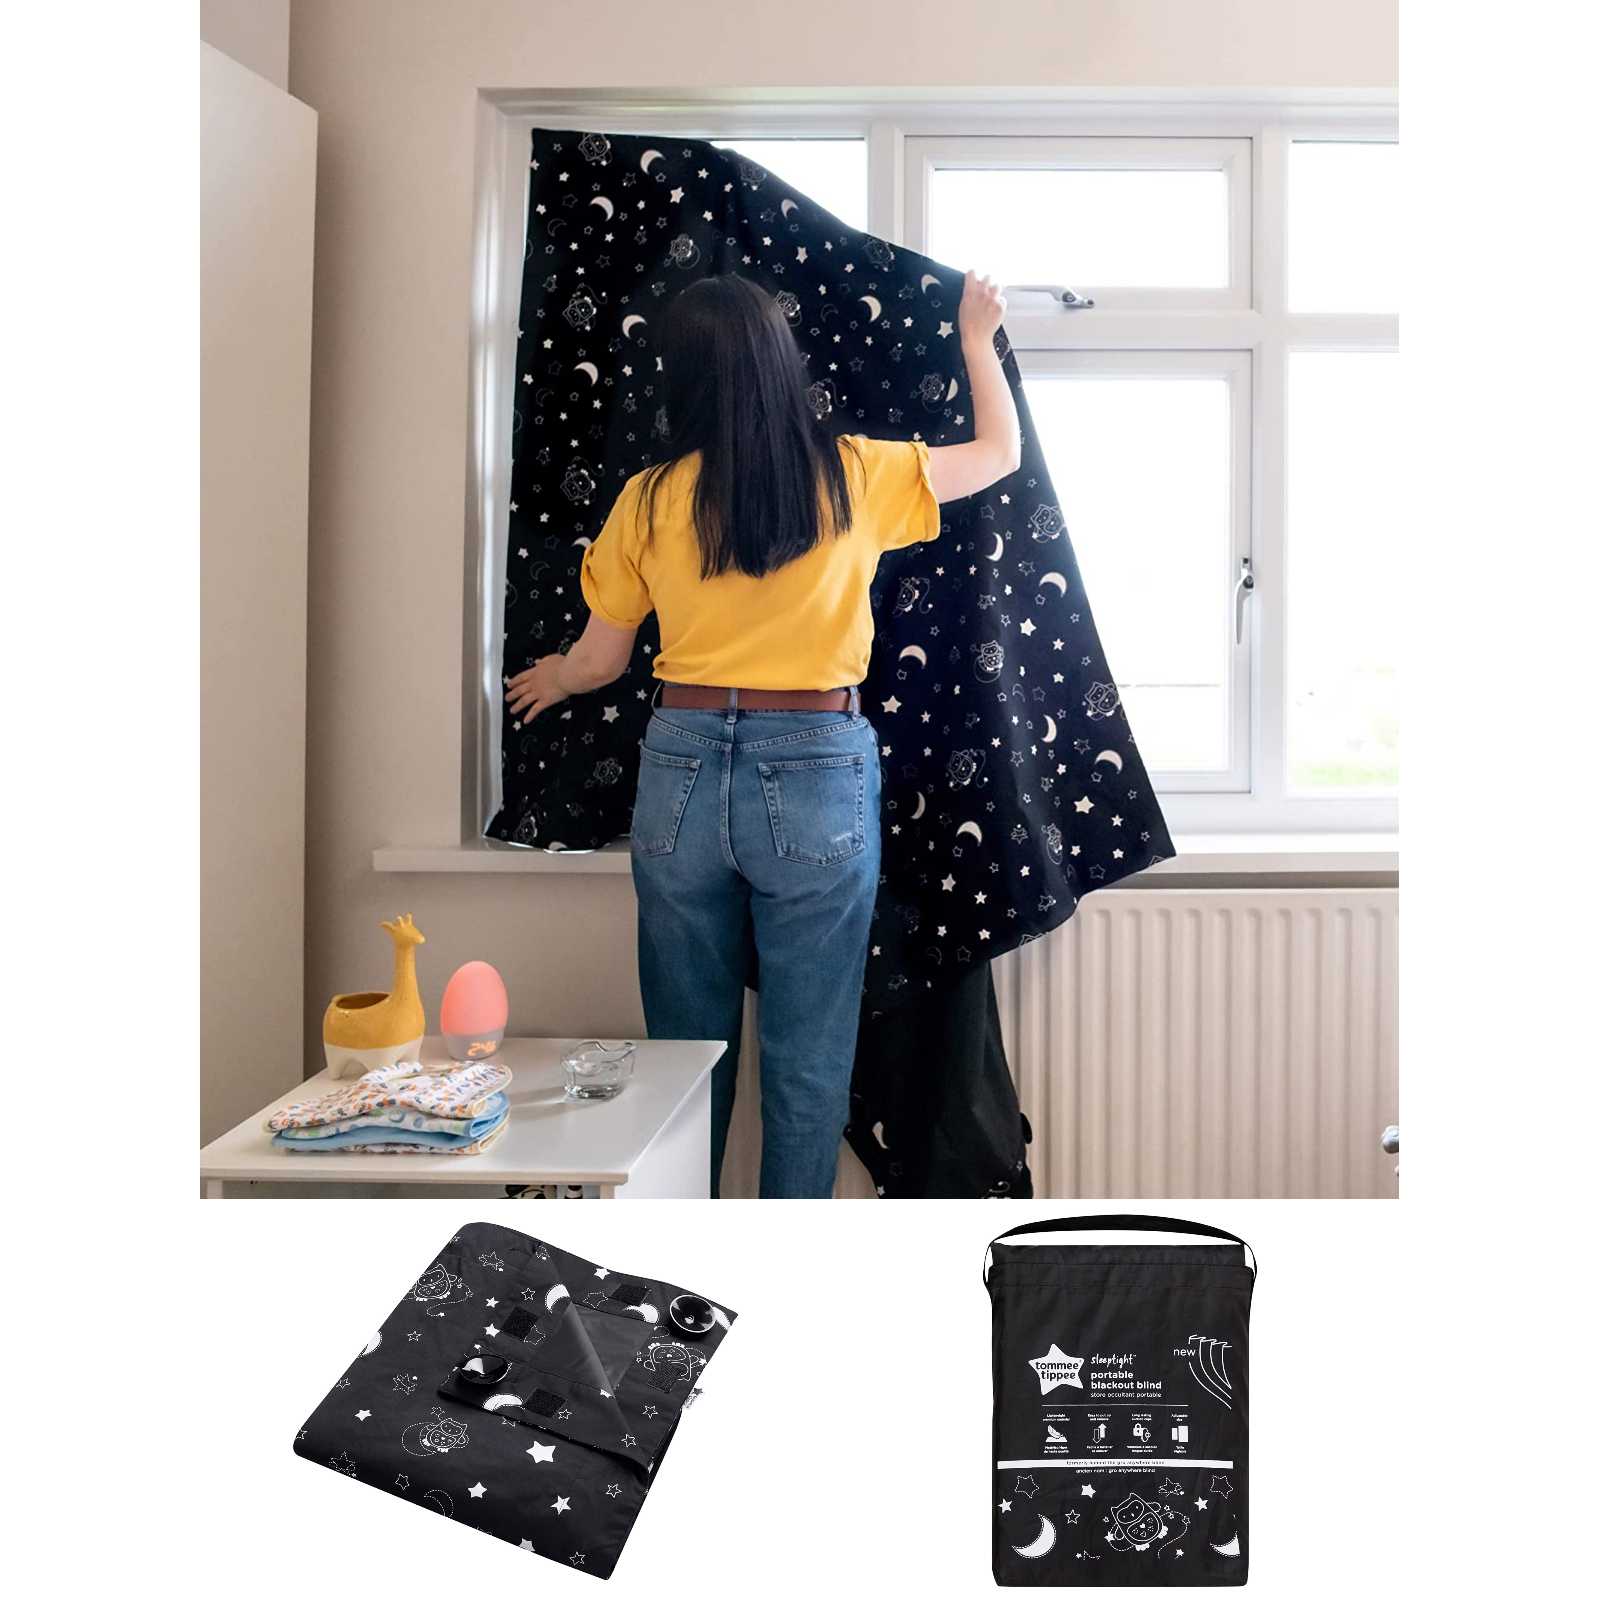 Tommee Tippee Regular Portable Black Out Blind with Suction Cups (130cm x 99cm) - Black